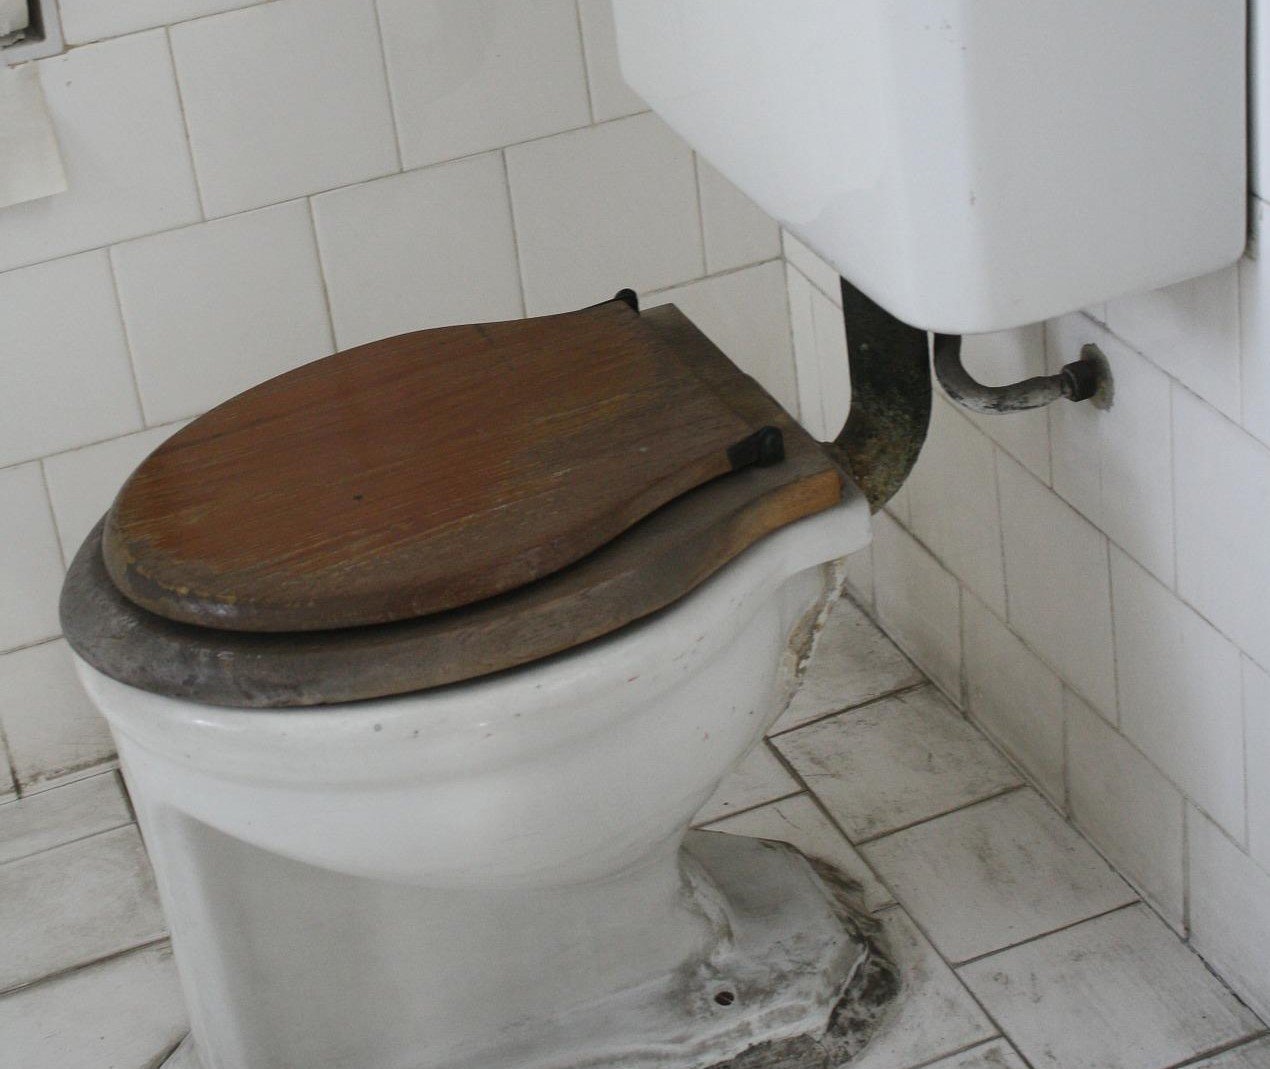 Eva wanted to fix a broken toilet in her bathroom, so she looked for a cheap one online. | Source: Pixabay 